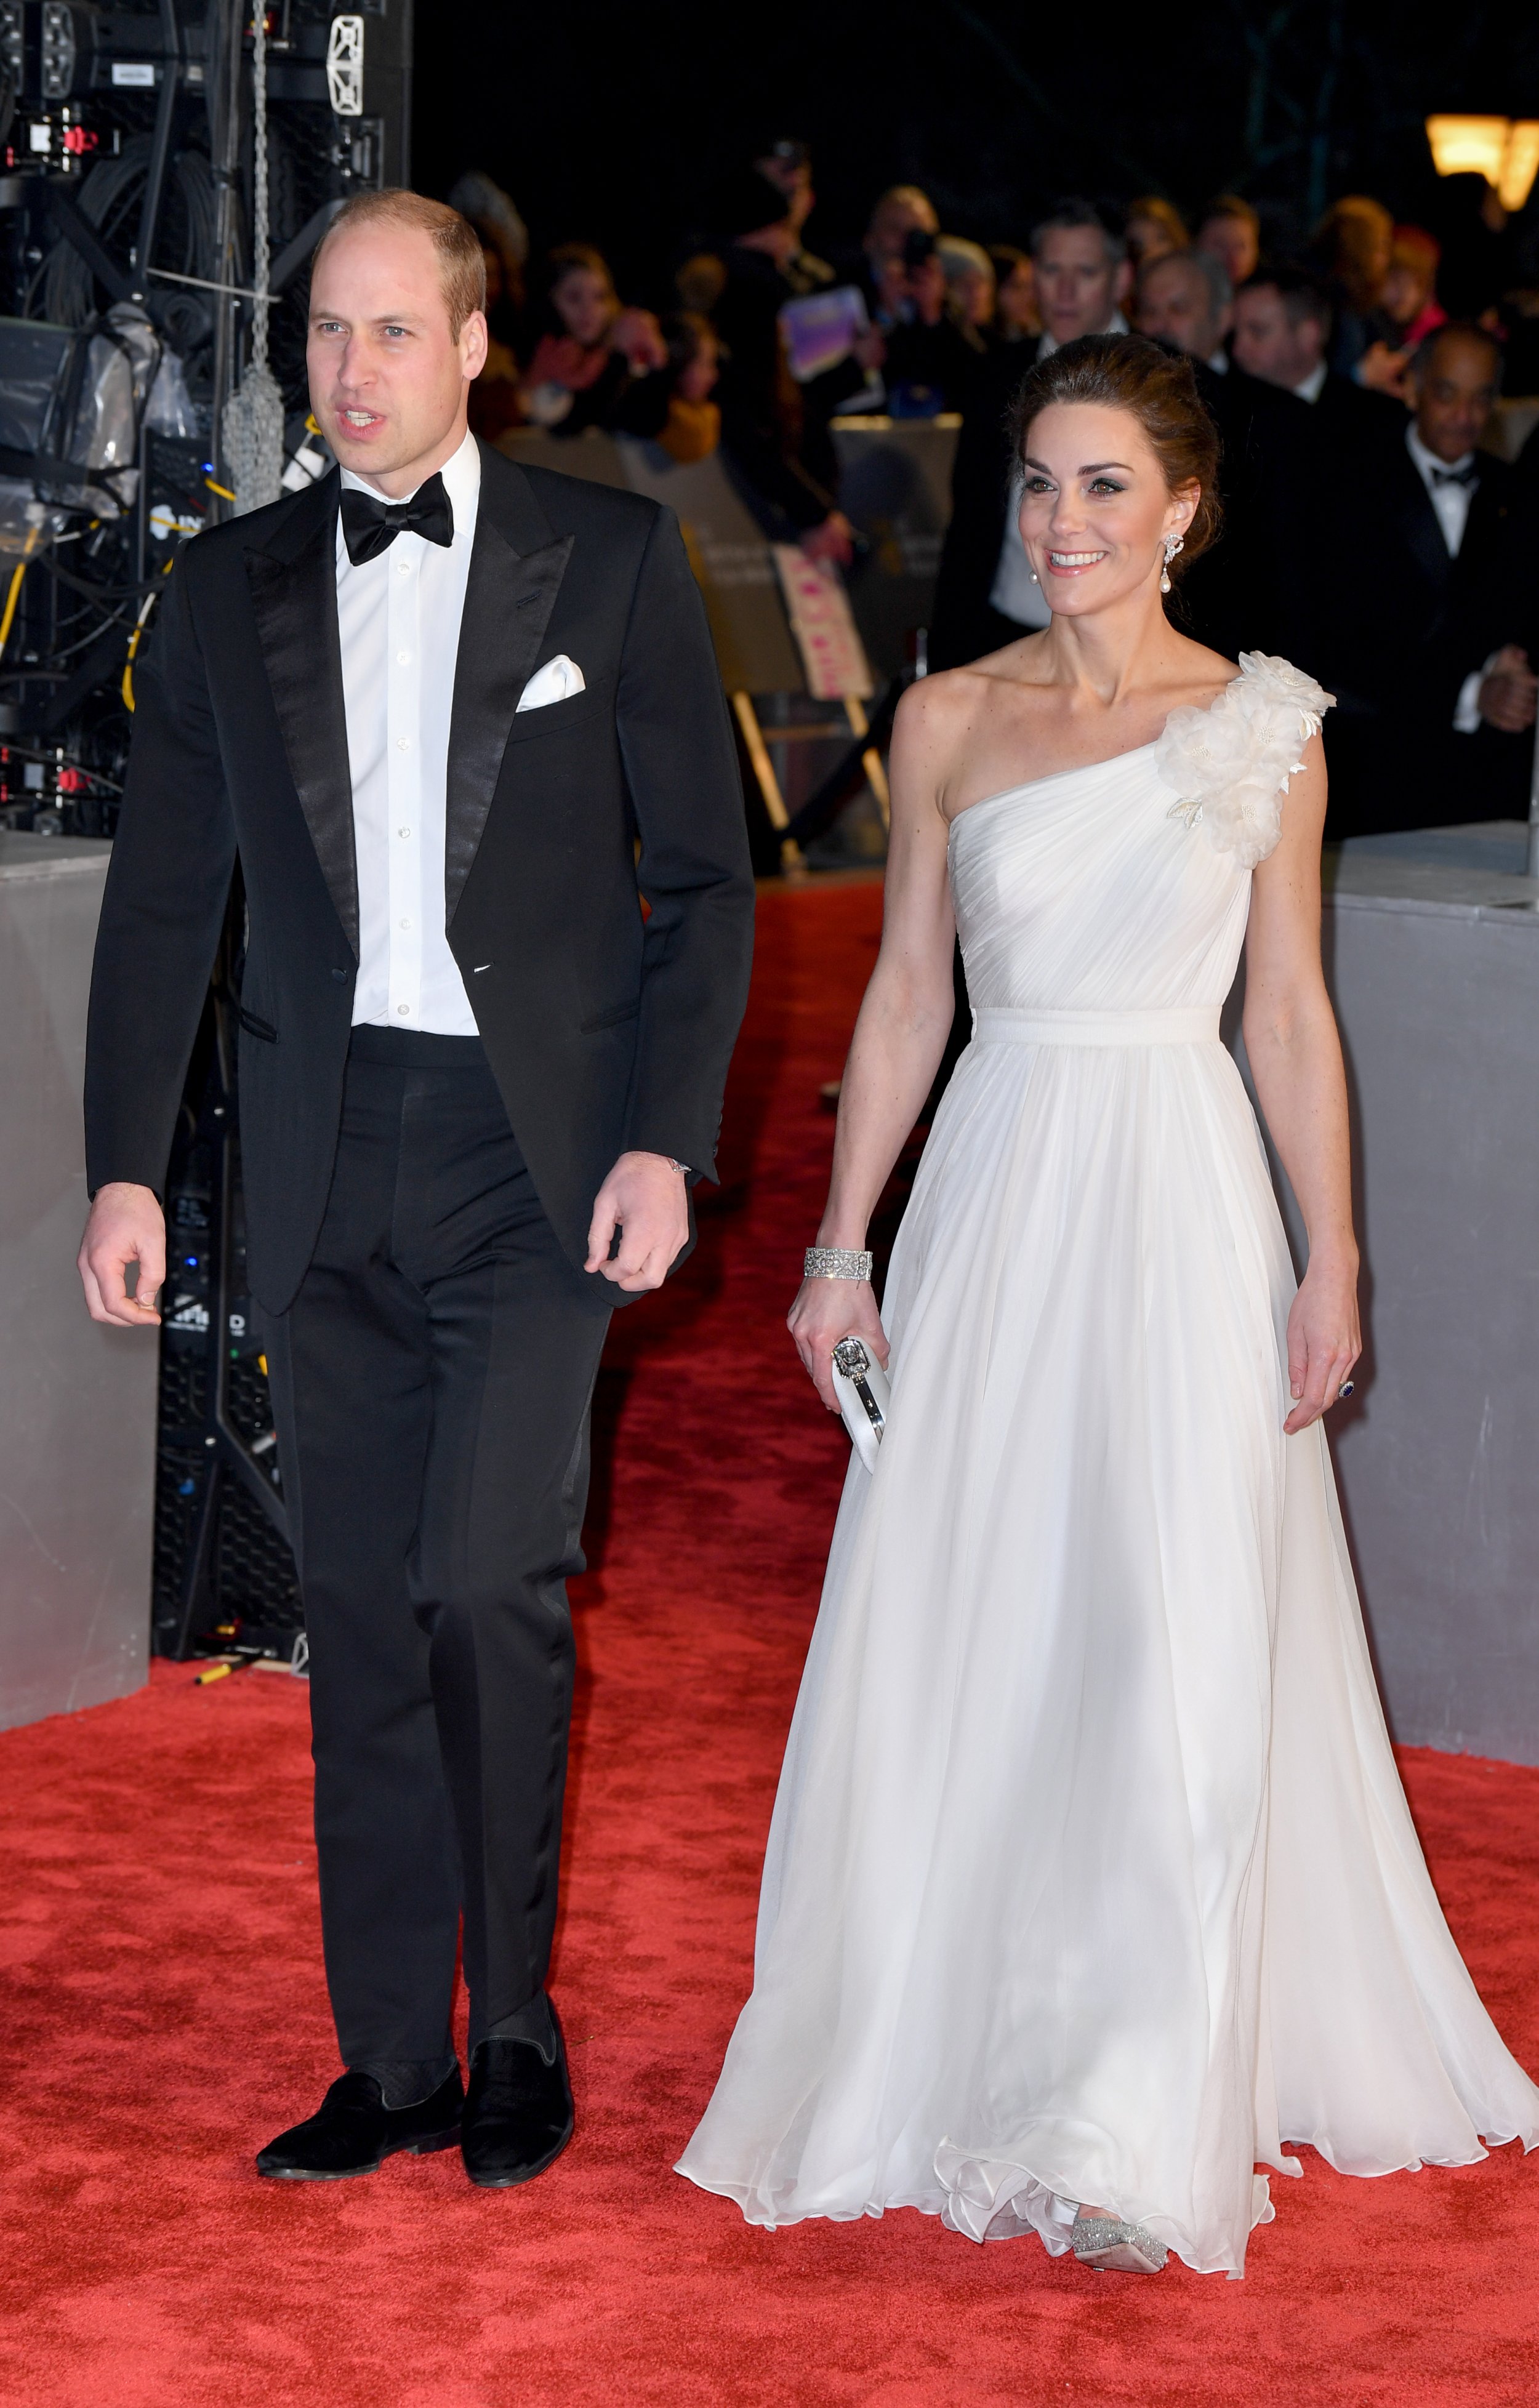 Why Are Prince William And Kate Middleton At The BAFTA Film Awards ...